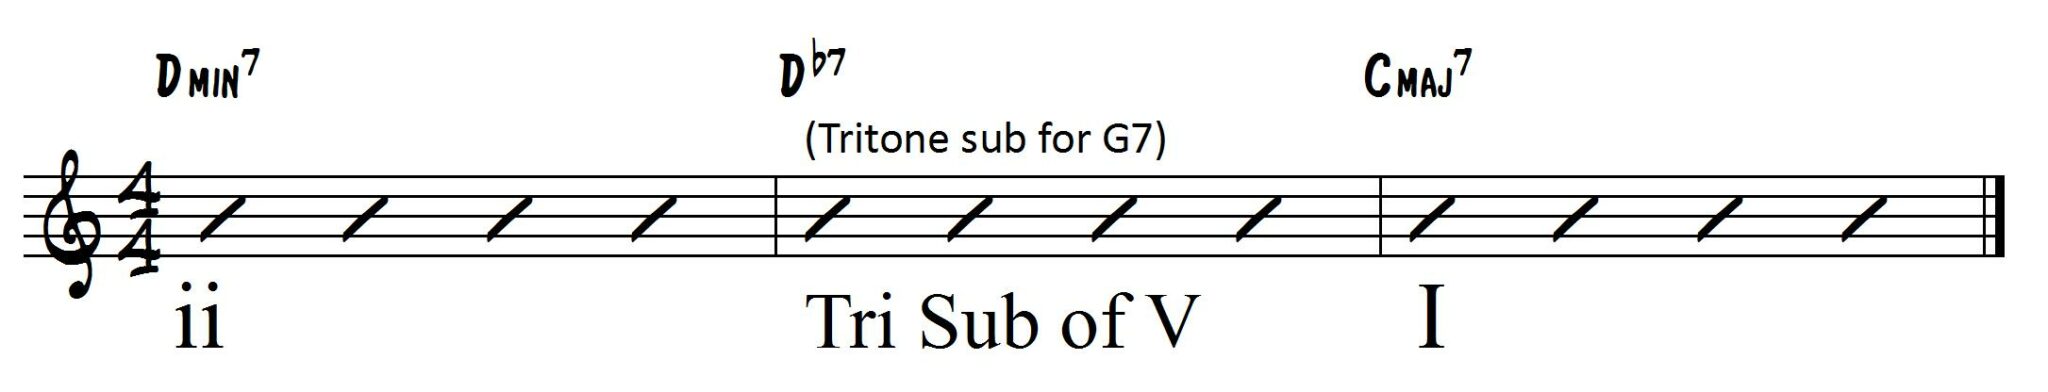 Tritone Substitution of V in a Chord Progression in the key of c major